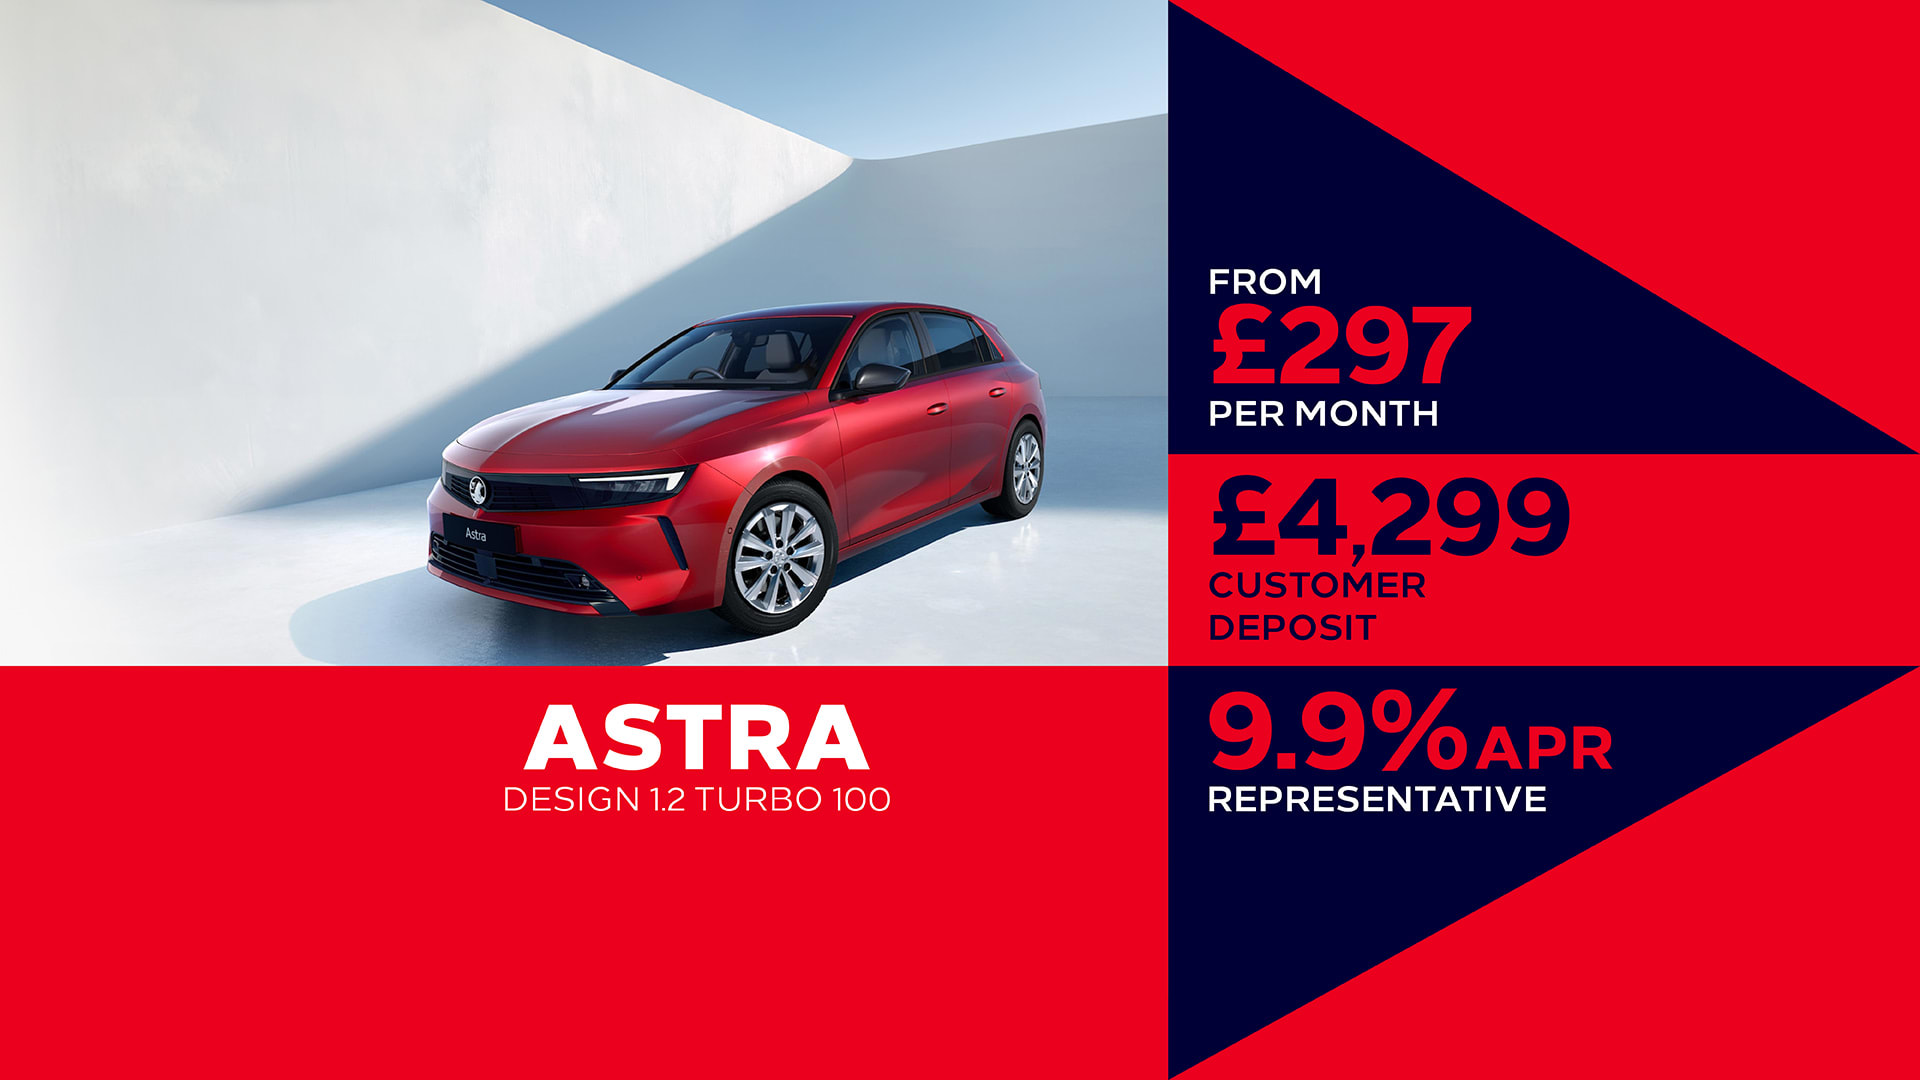 Vauxhall Astra Finance Offer